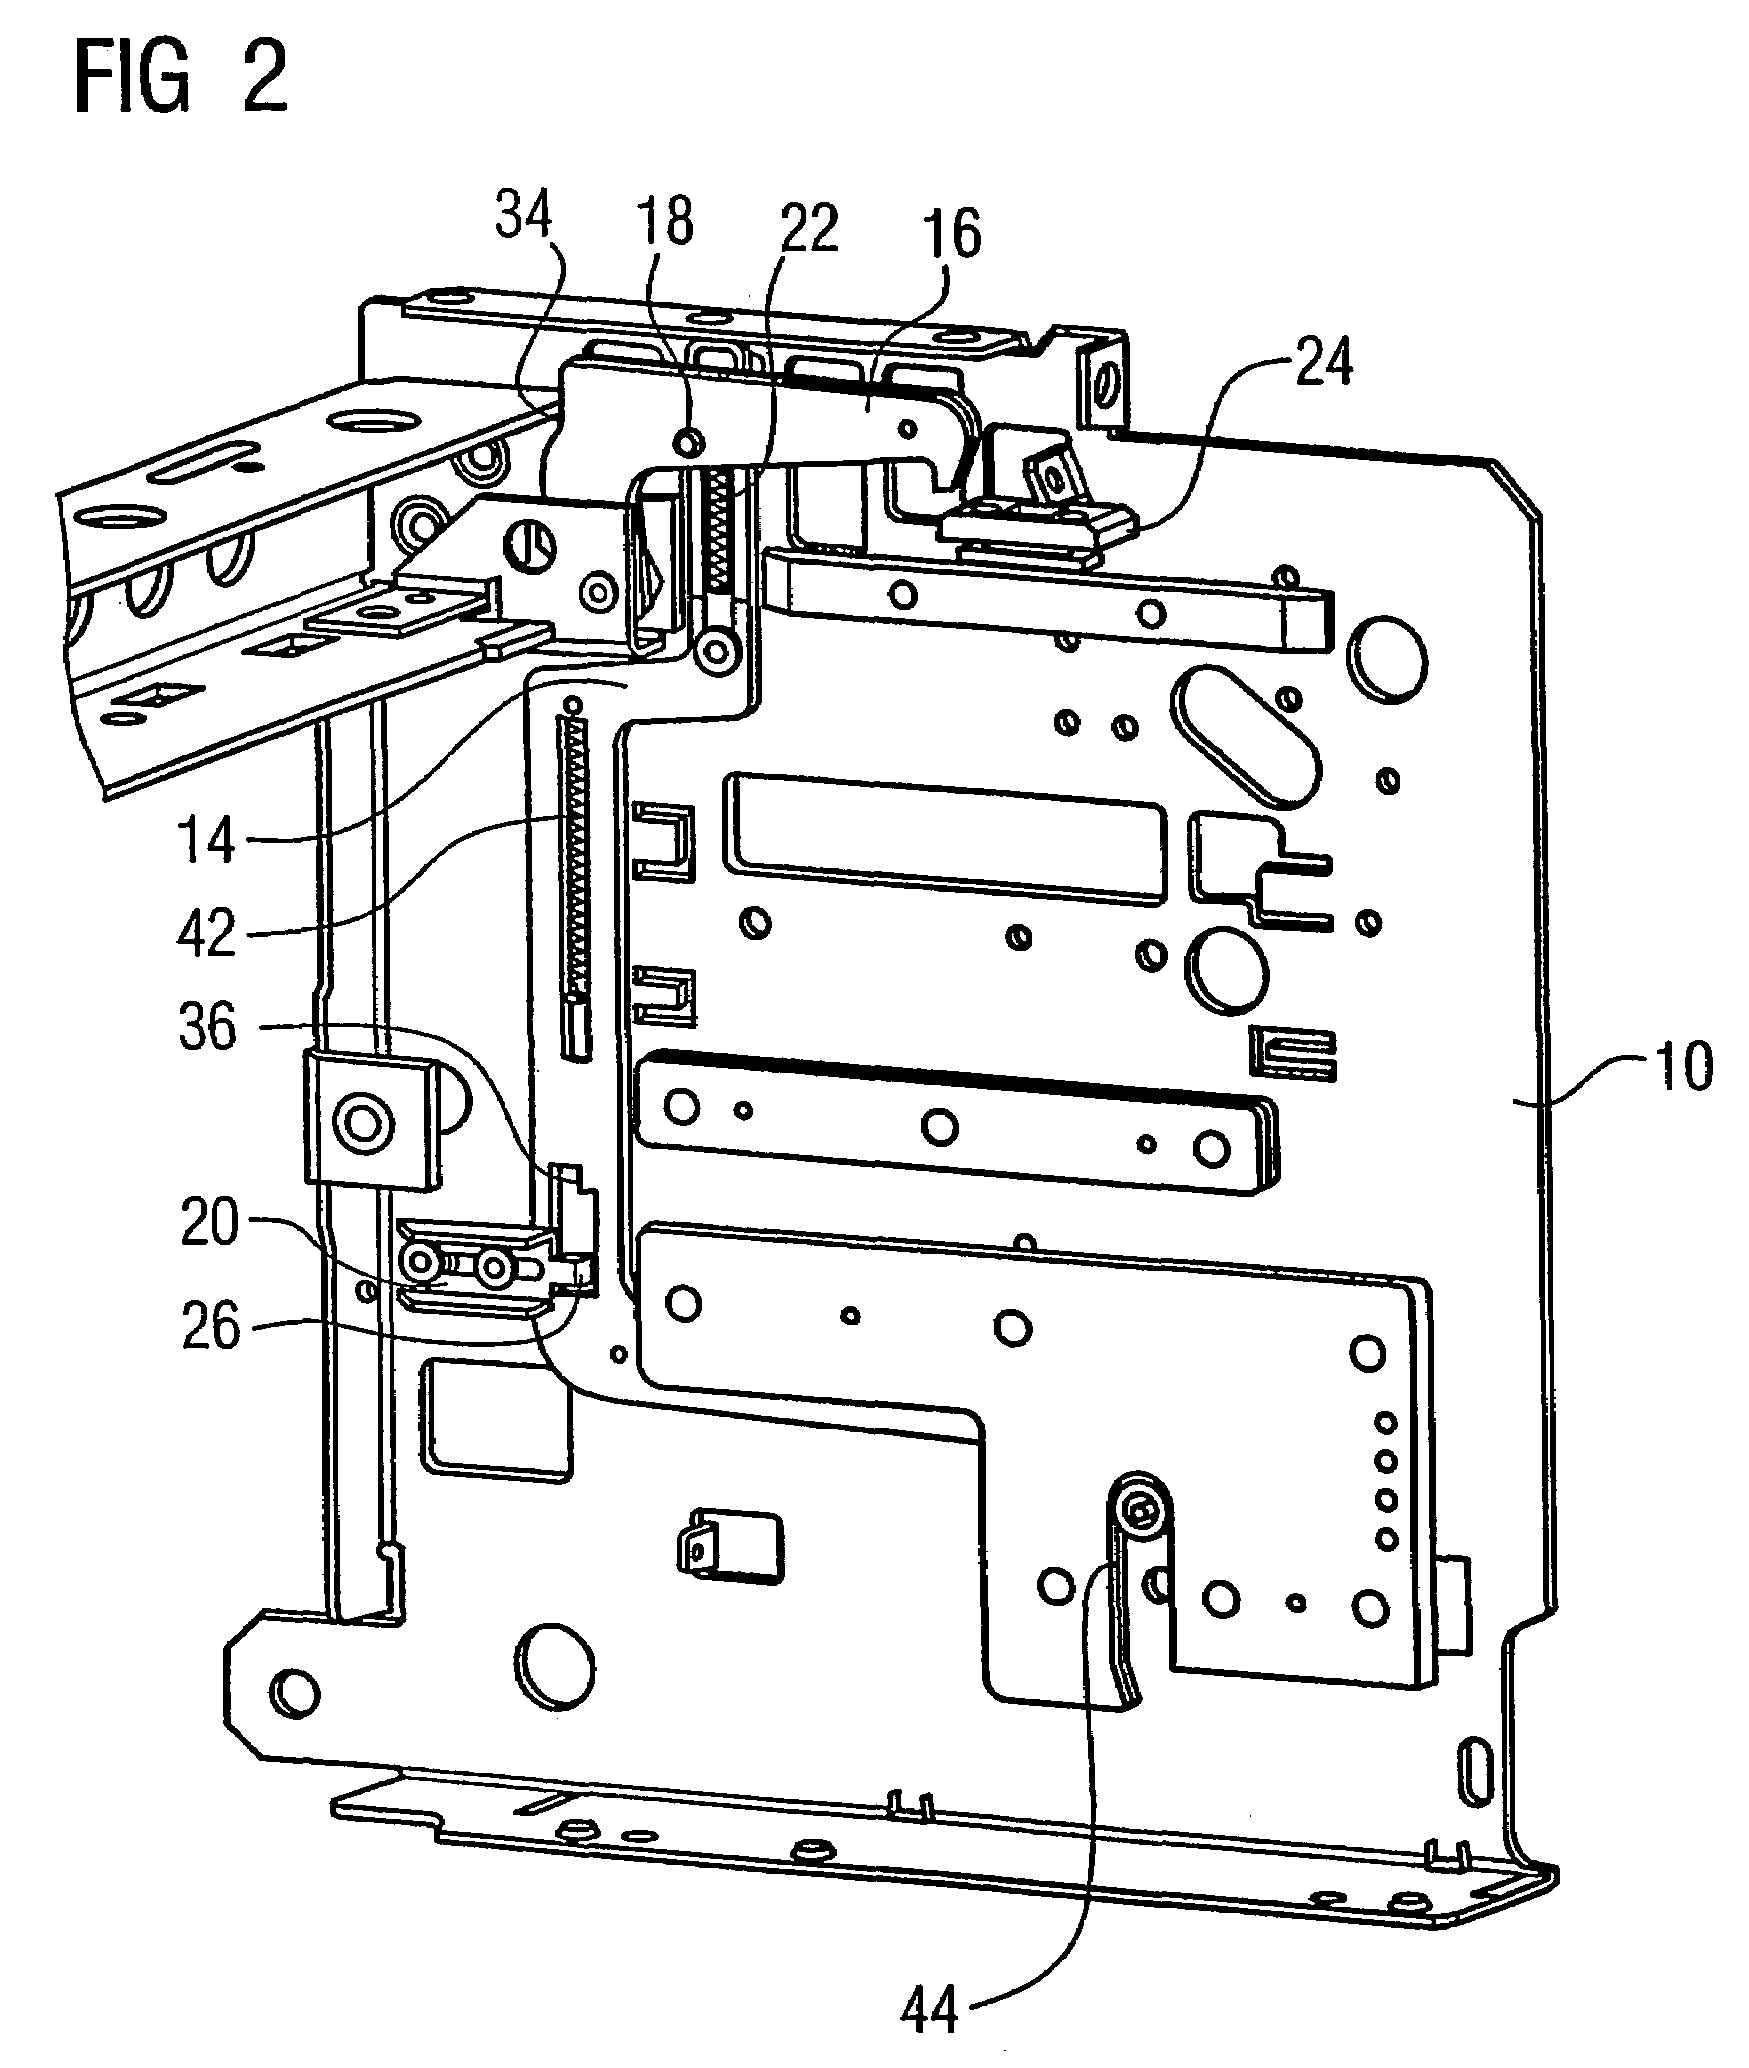 Device for fixing a power circuit breaker in an insertion rack